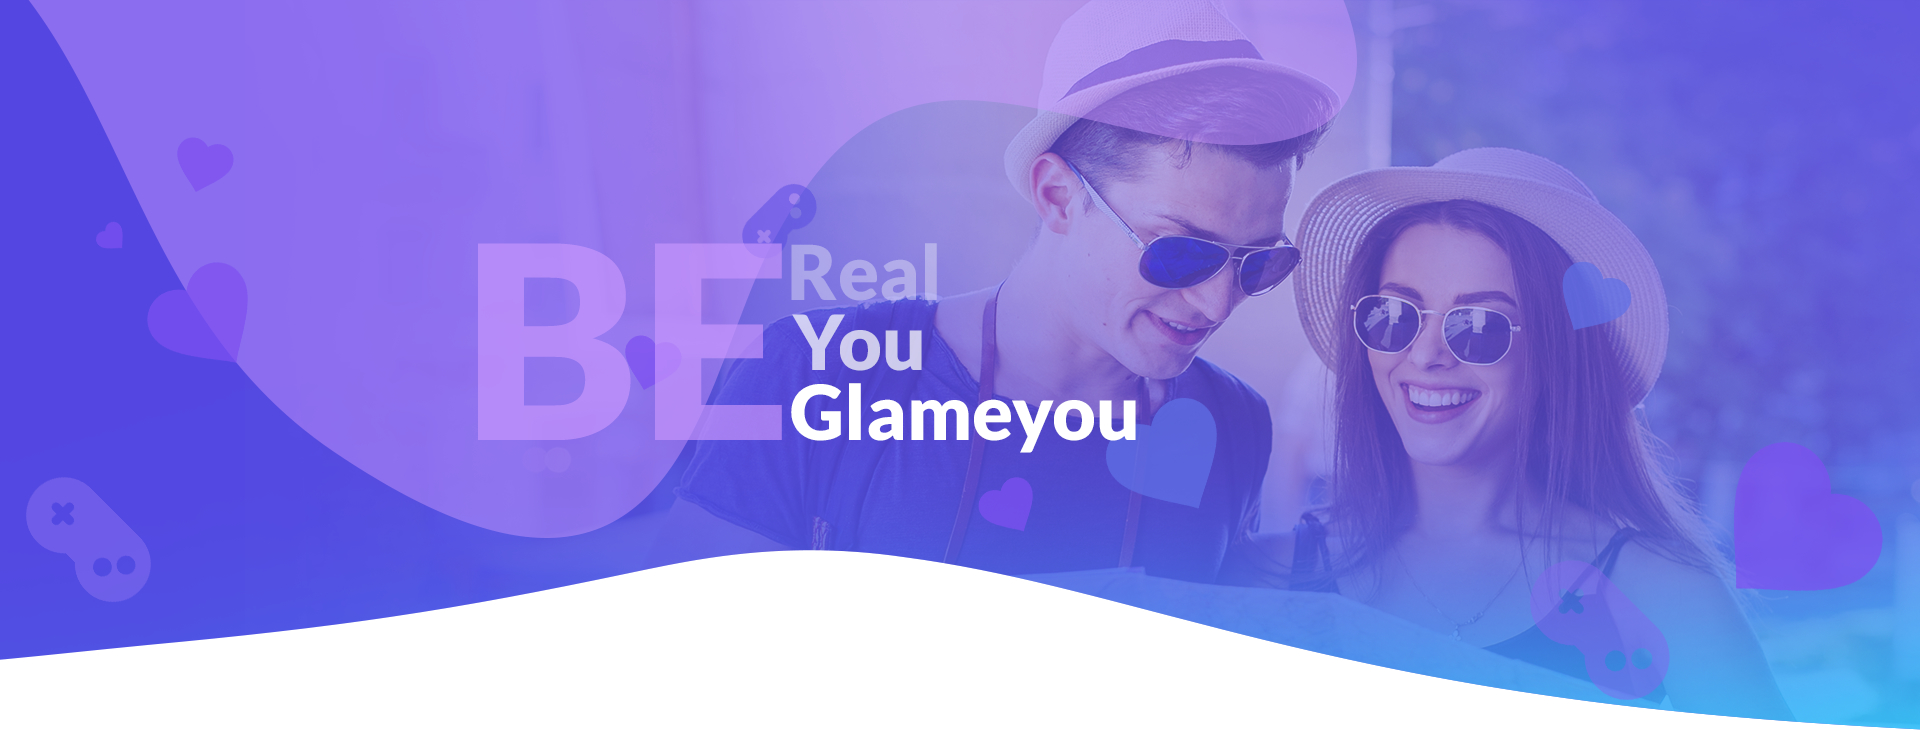 Be real. Be you. Be Glameyou.